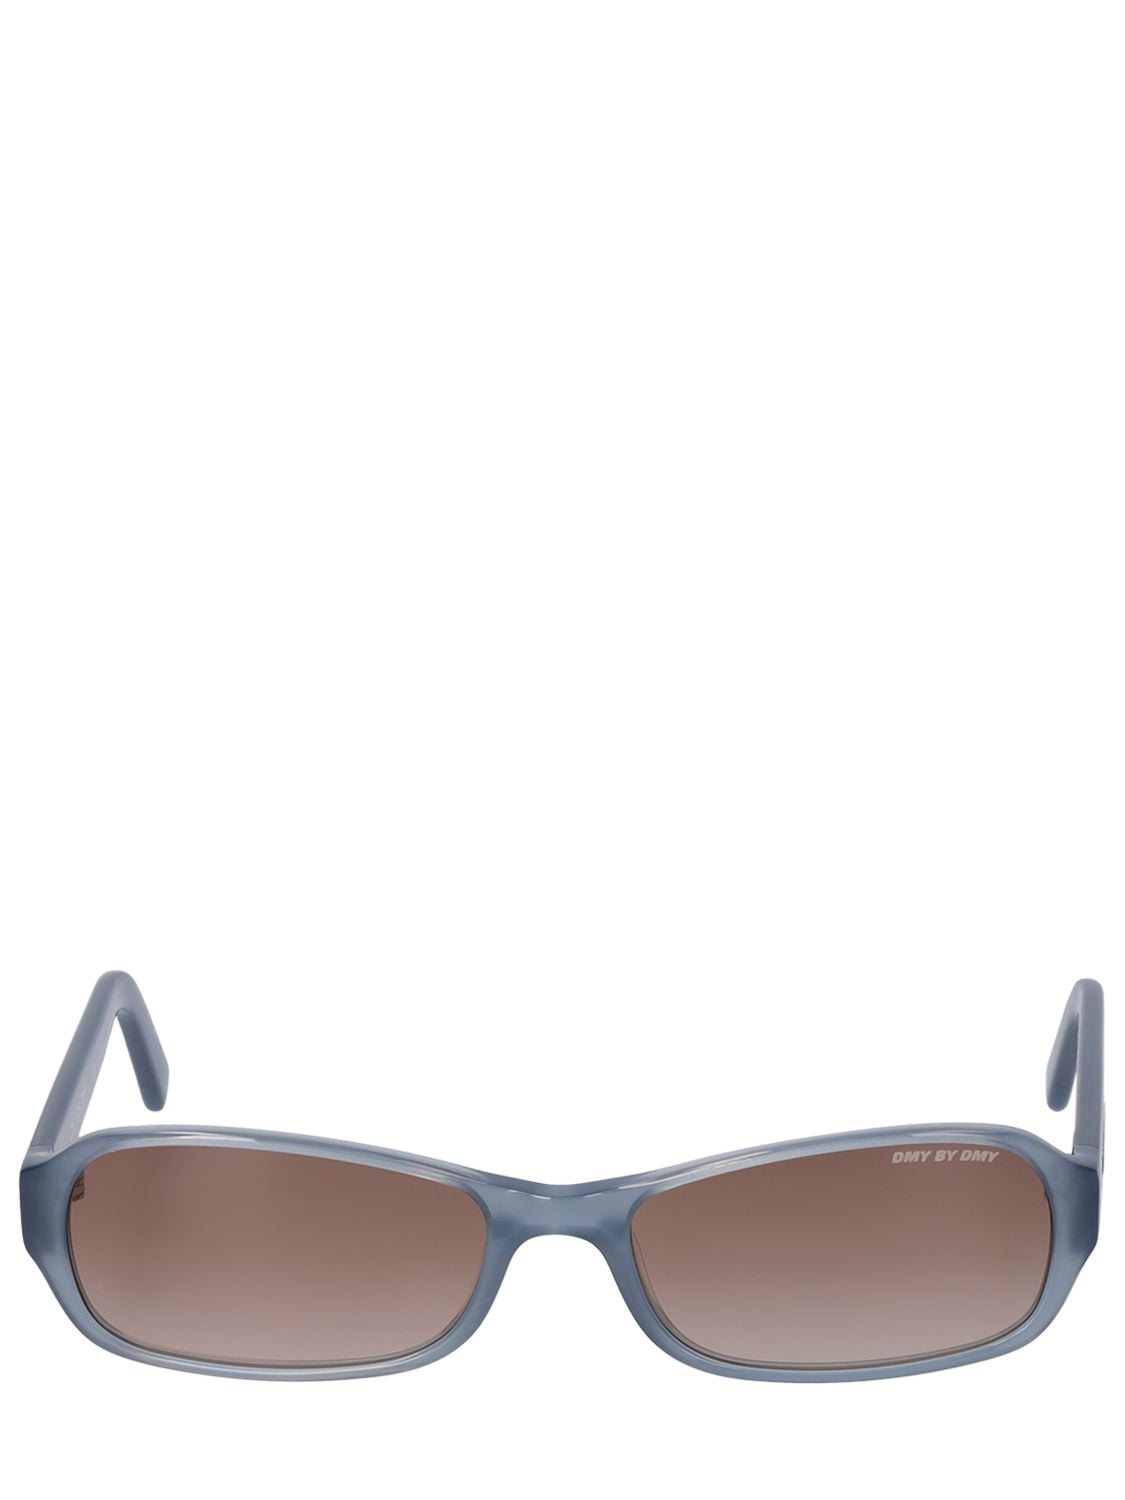 DMY BY DMY Juno Squared Acetate Sunglasses